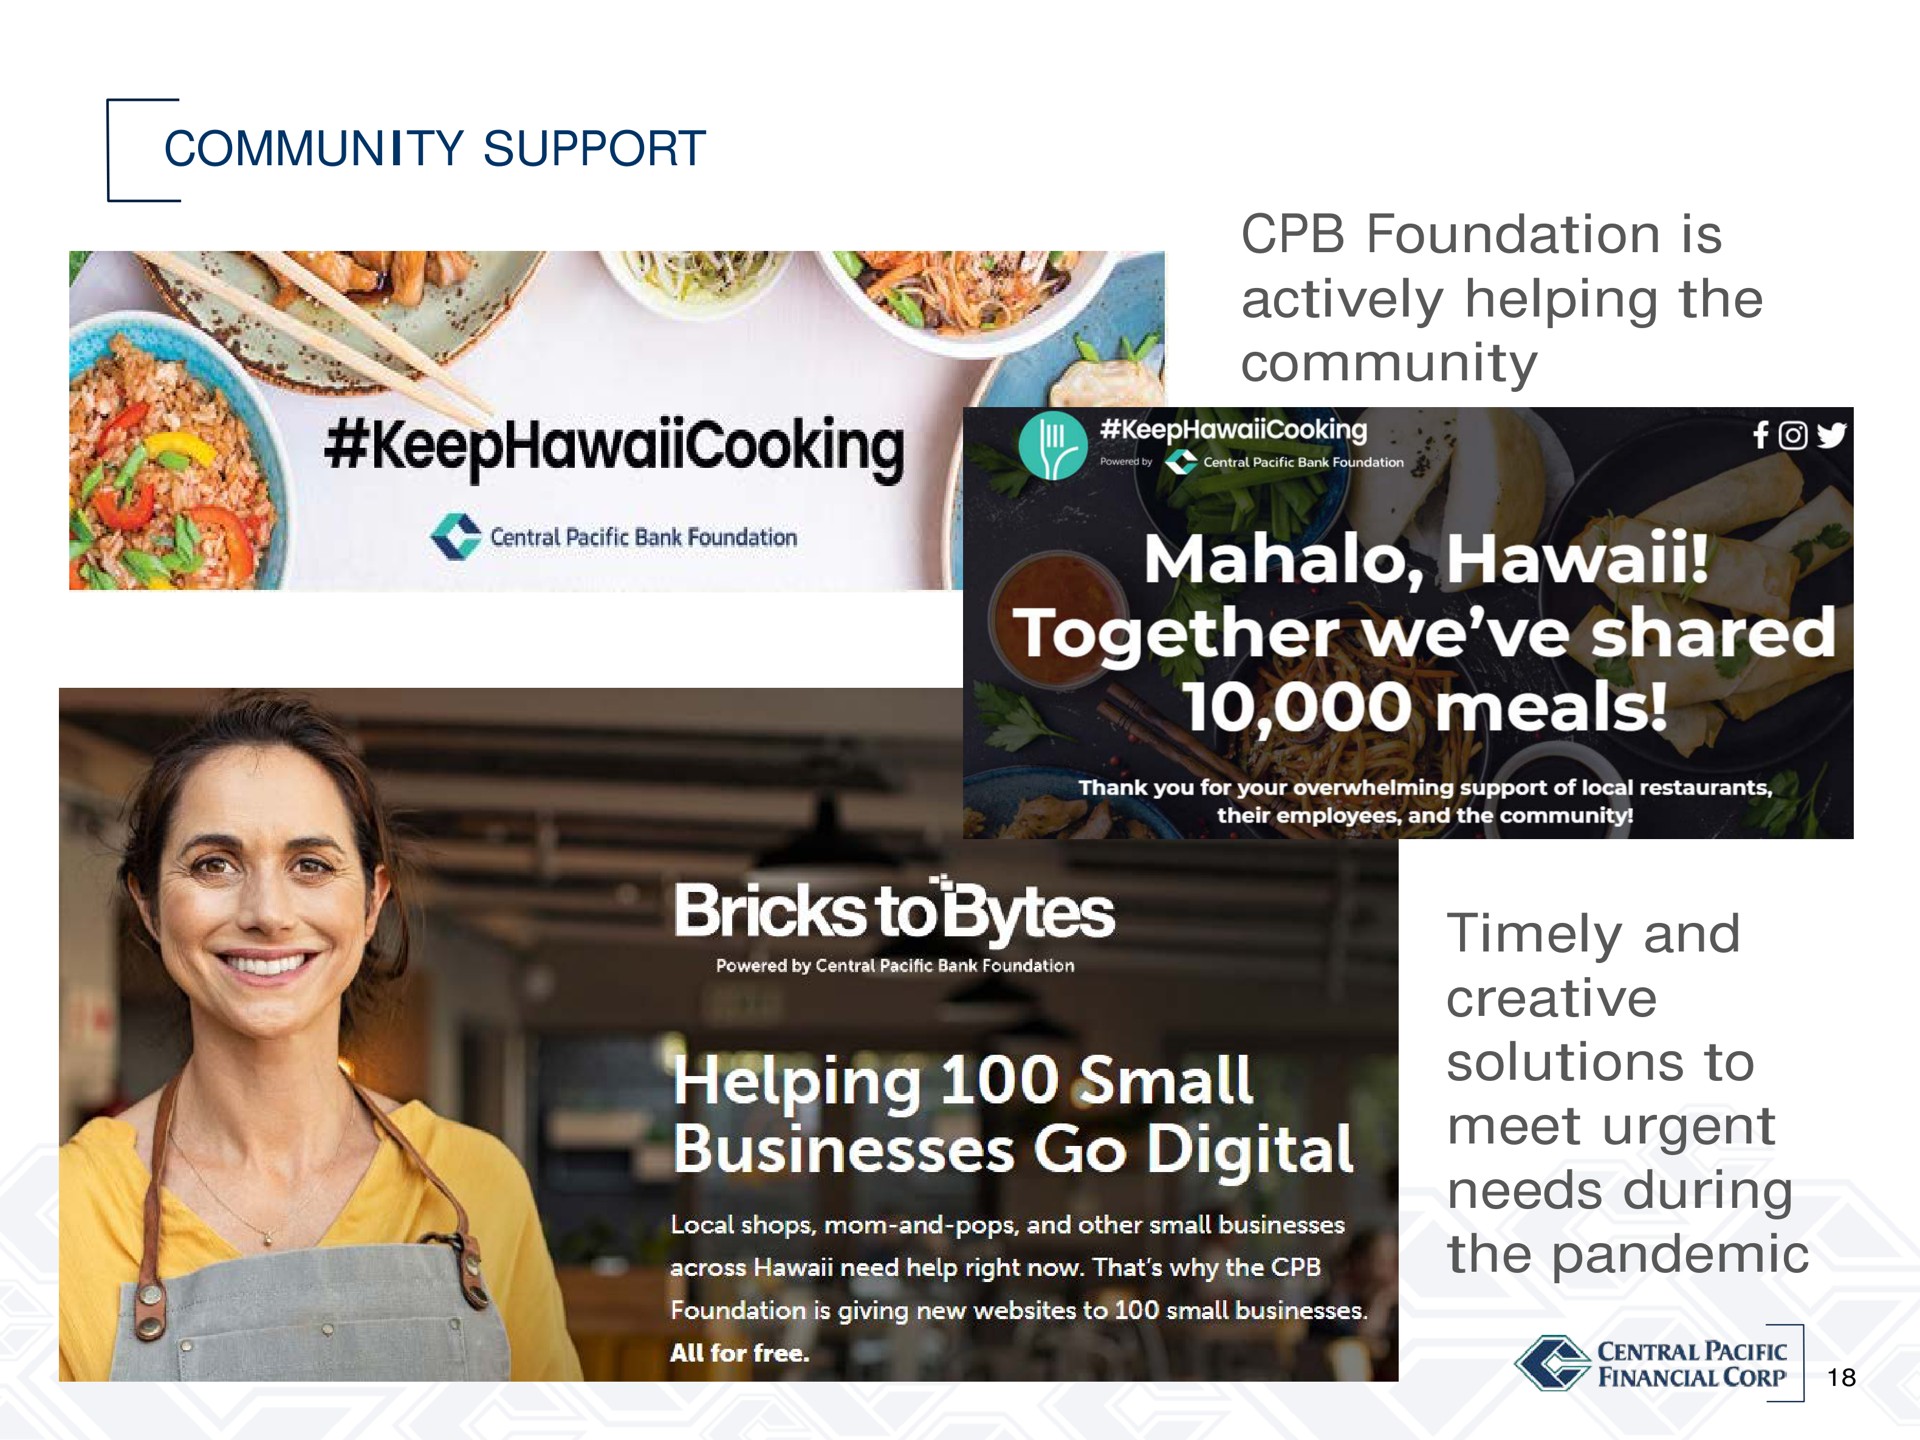 community support foundation is actively helping the community timely and creative solutions to meet urgent needs during the pandemic a cooking a a together we shared meals bricks small us | Central Pacific Financial